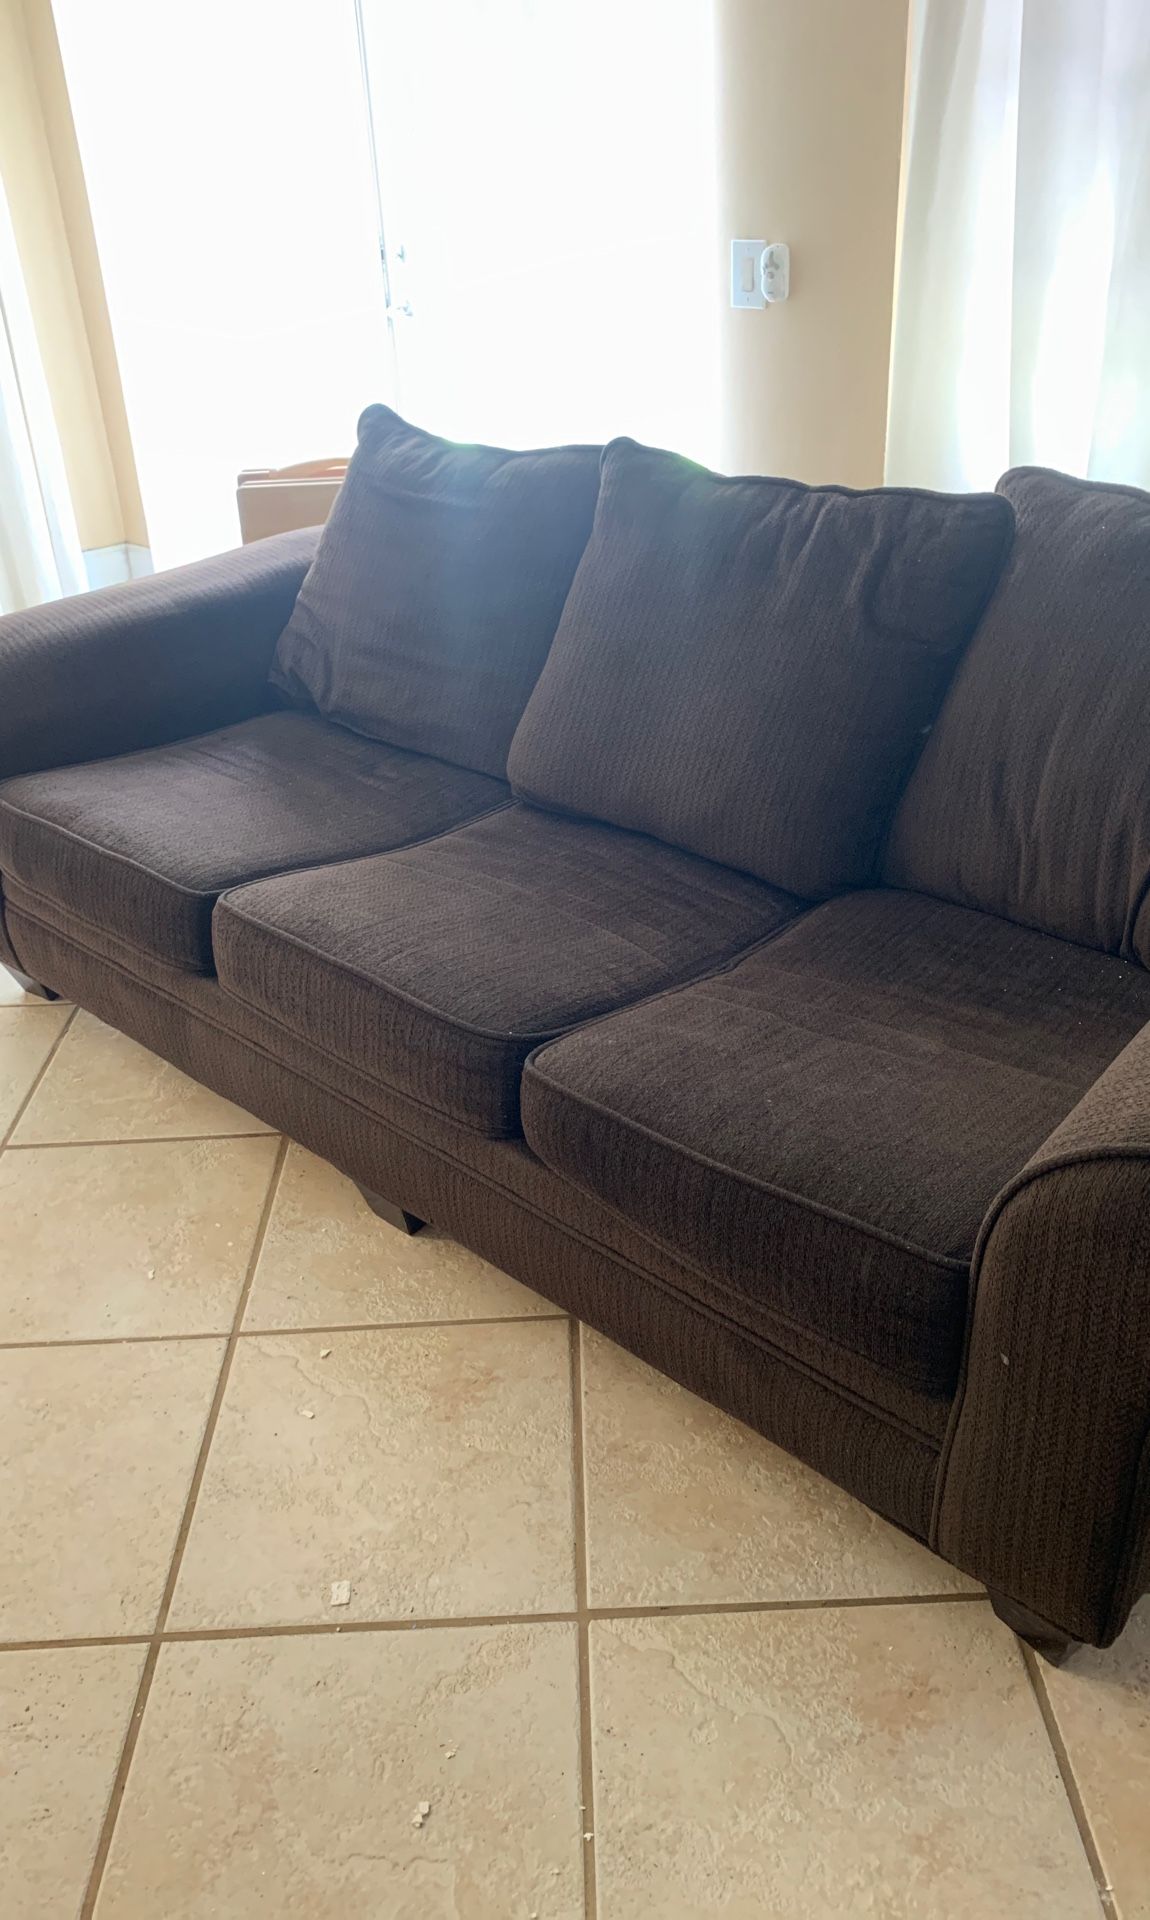 Dark Brown Convertible Couch with full sized mattress